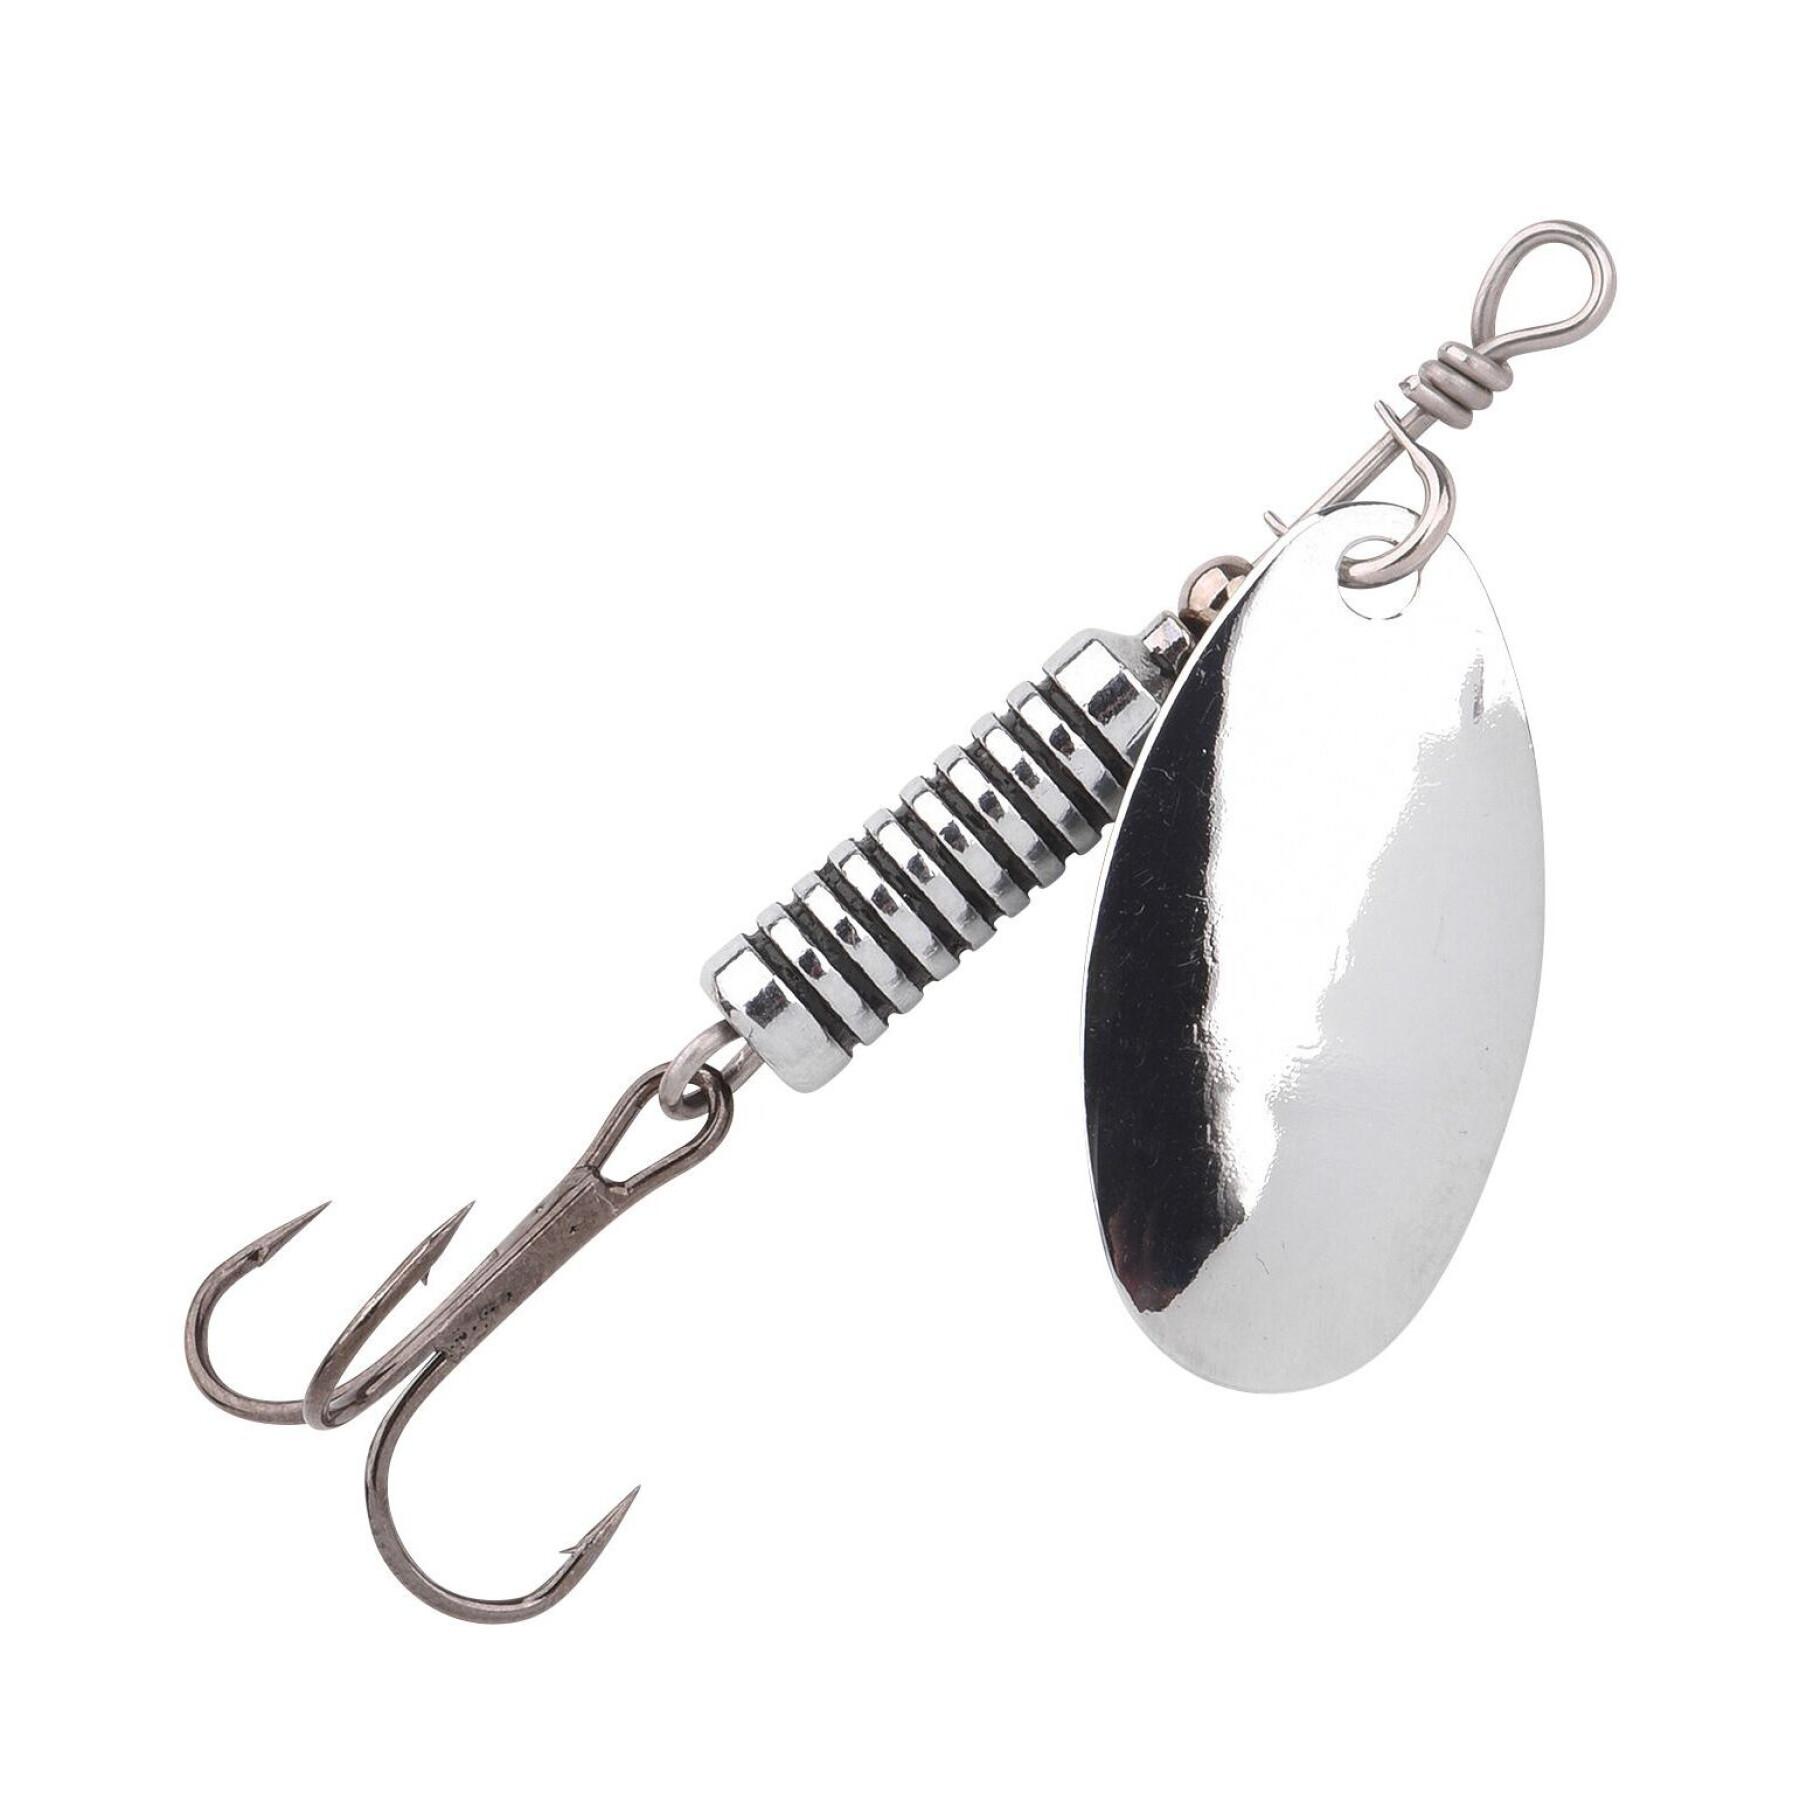 Cuillère pêche classique Powercatcher Spinner 8 g - Top Marques